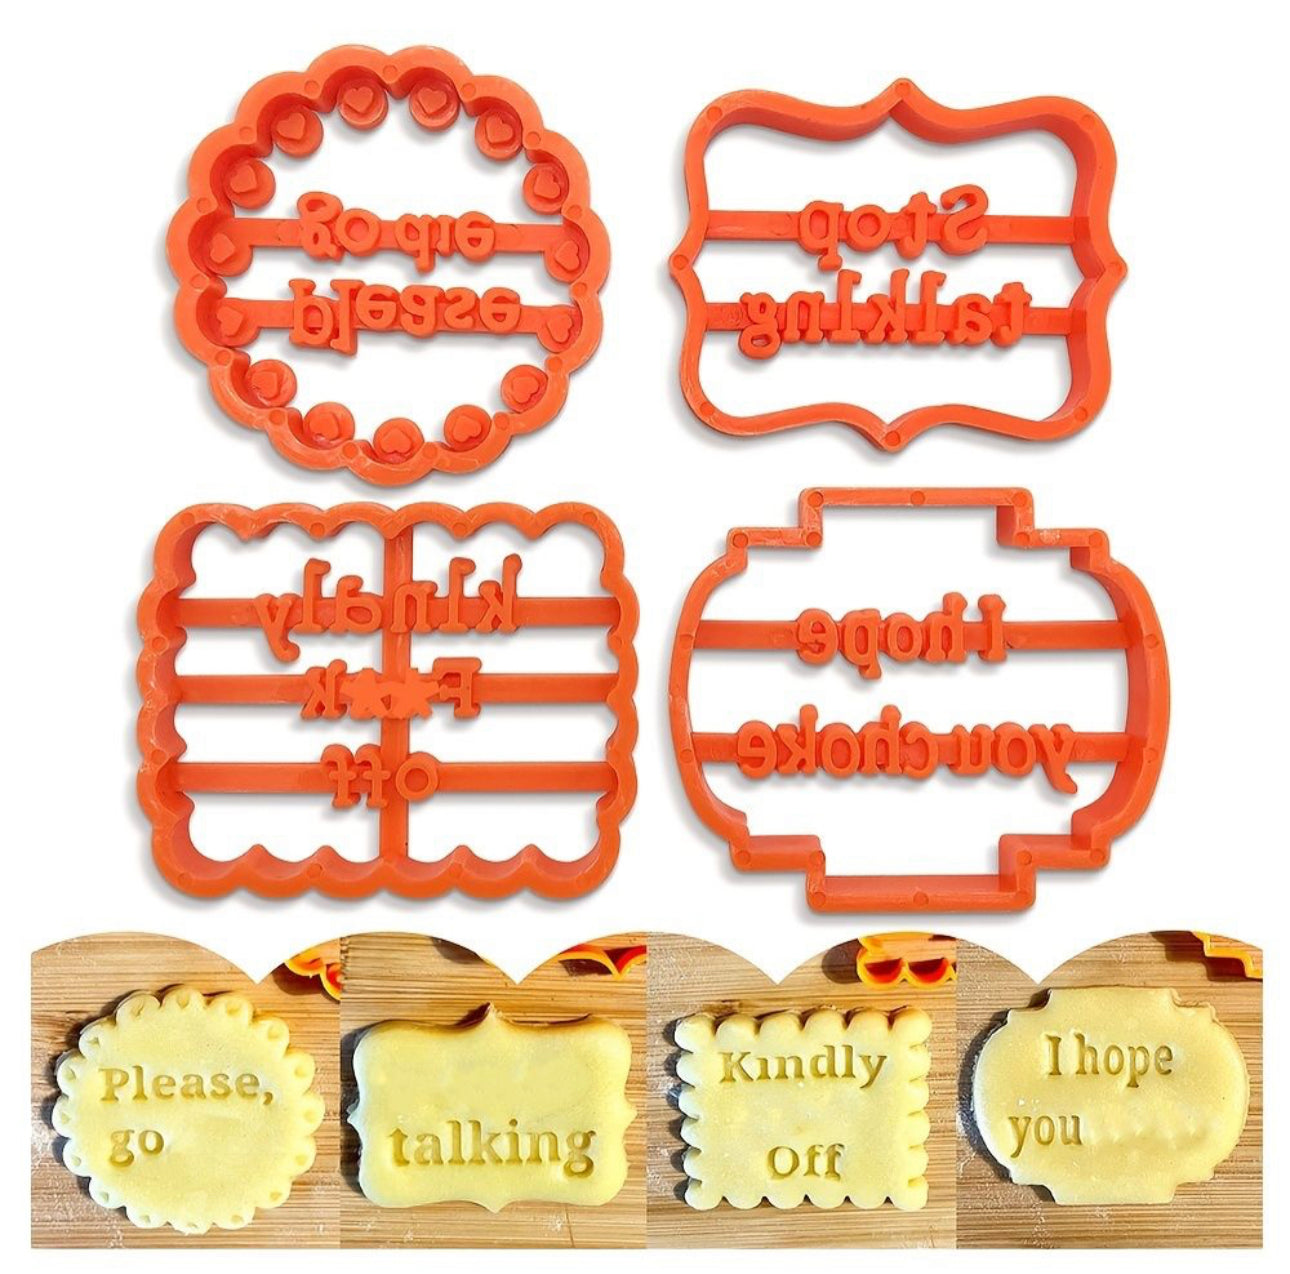 4pcs Cookie Molds With Good Wishes, Funny Cookie Cutter Form With Fun Phrases, Cookie Moulds For Baking Candy Chocolate Cookie